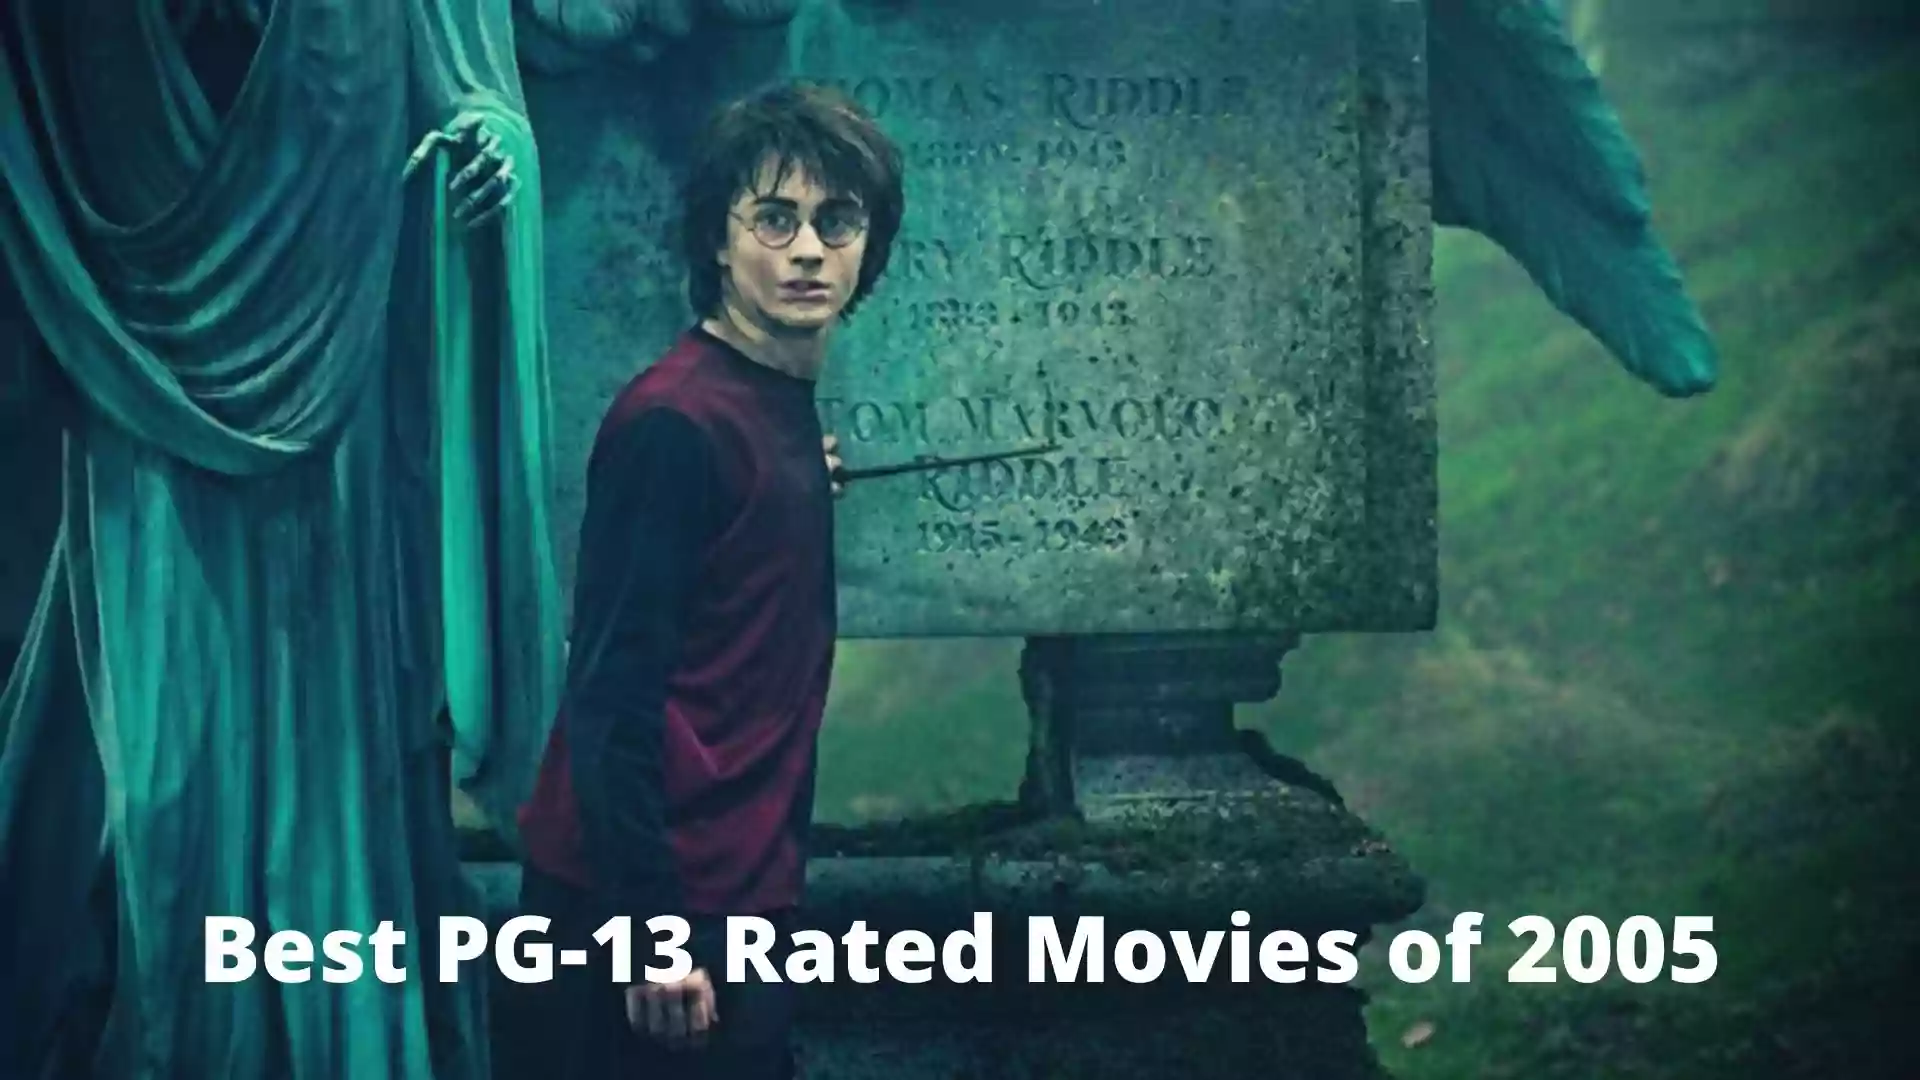 Best PG-13 Rated Movies of 2005